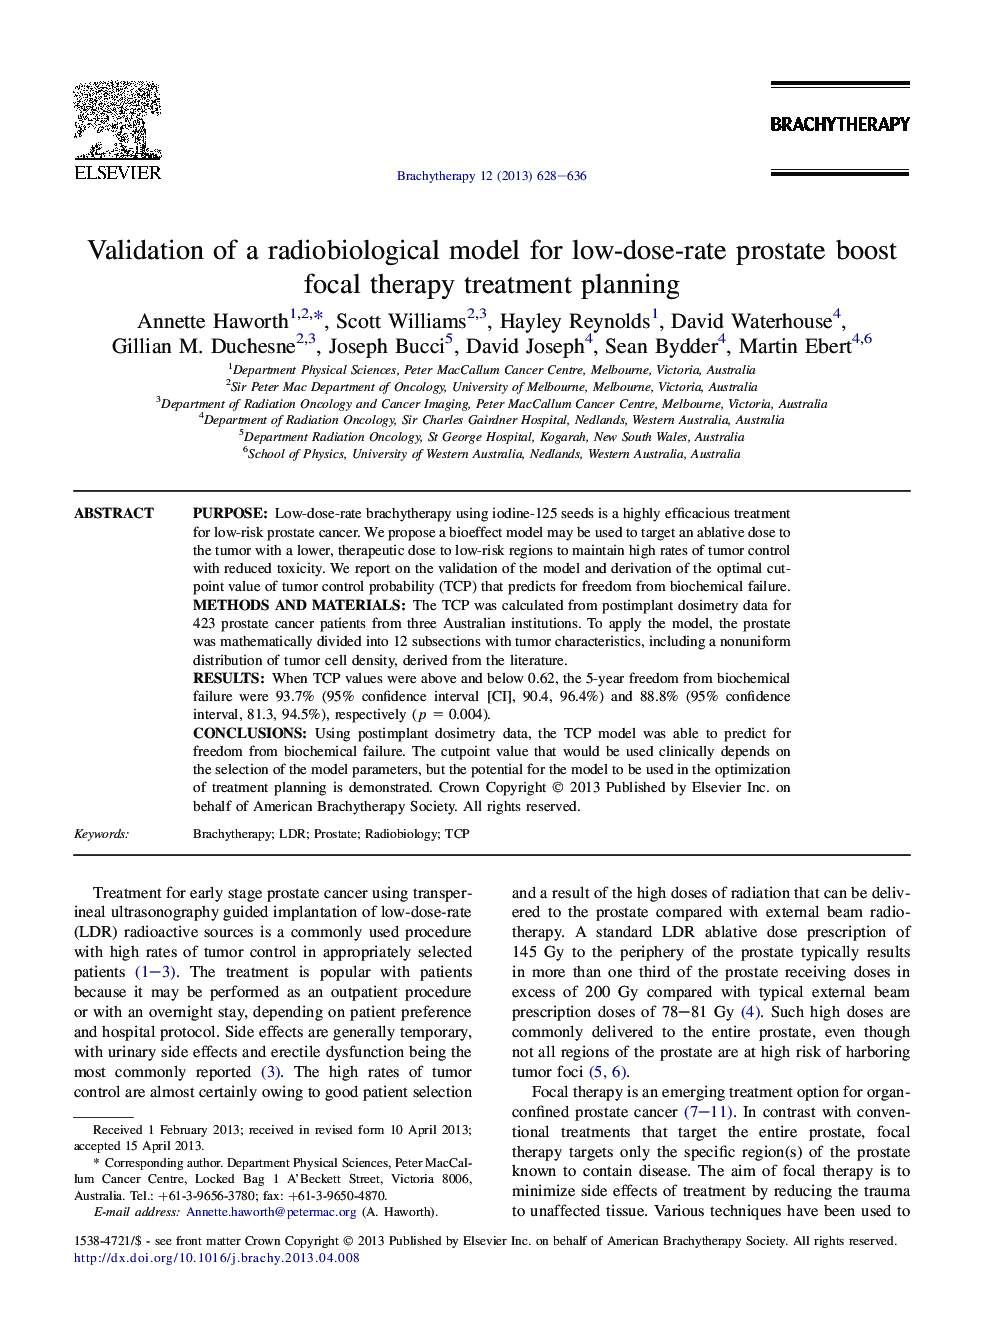 Validation of a radiobiological model for low-dose-rate prostate boost focal therapy treatment planning